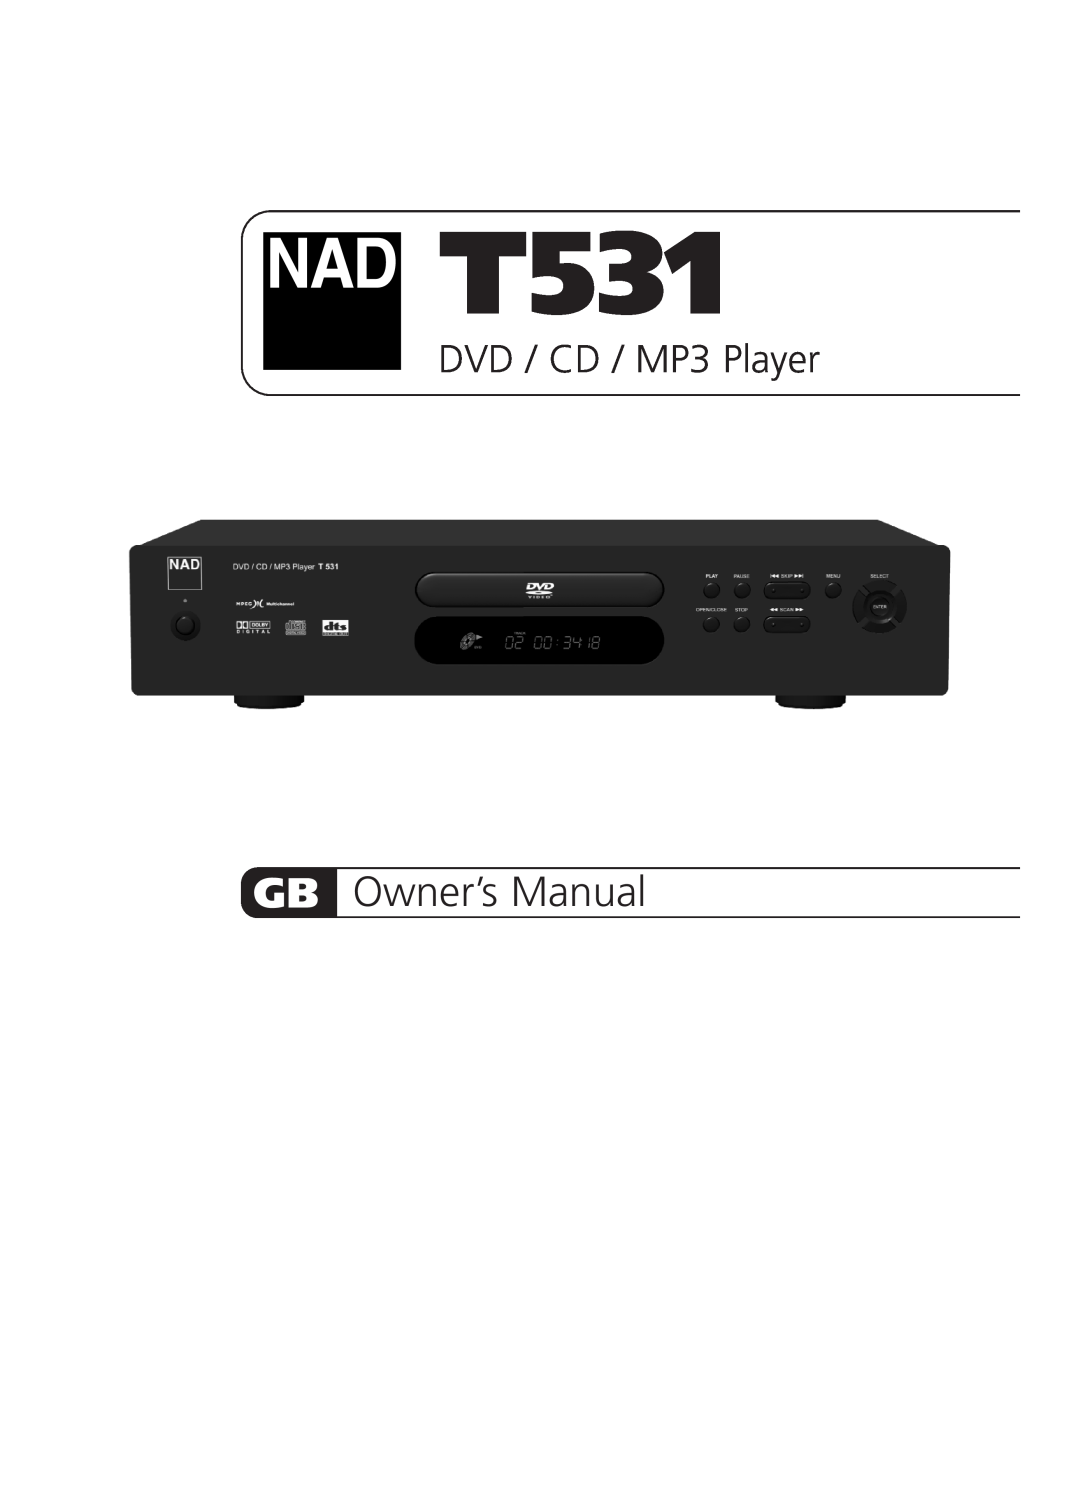 NAD T531 owner manual Gb F D S, DVD / CD / MP3 Player 